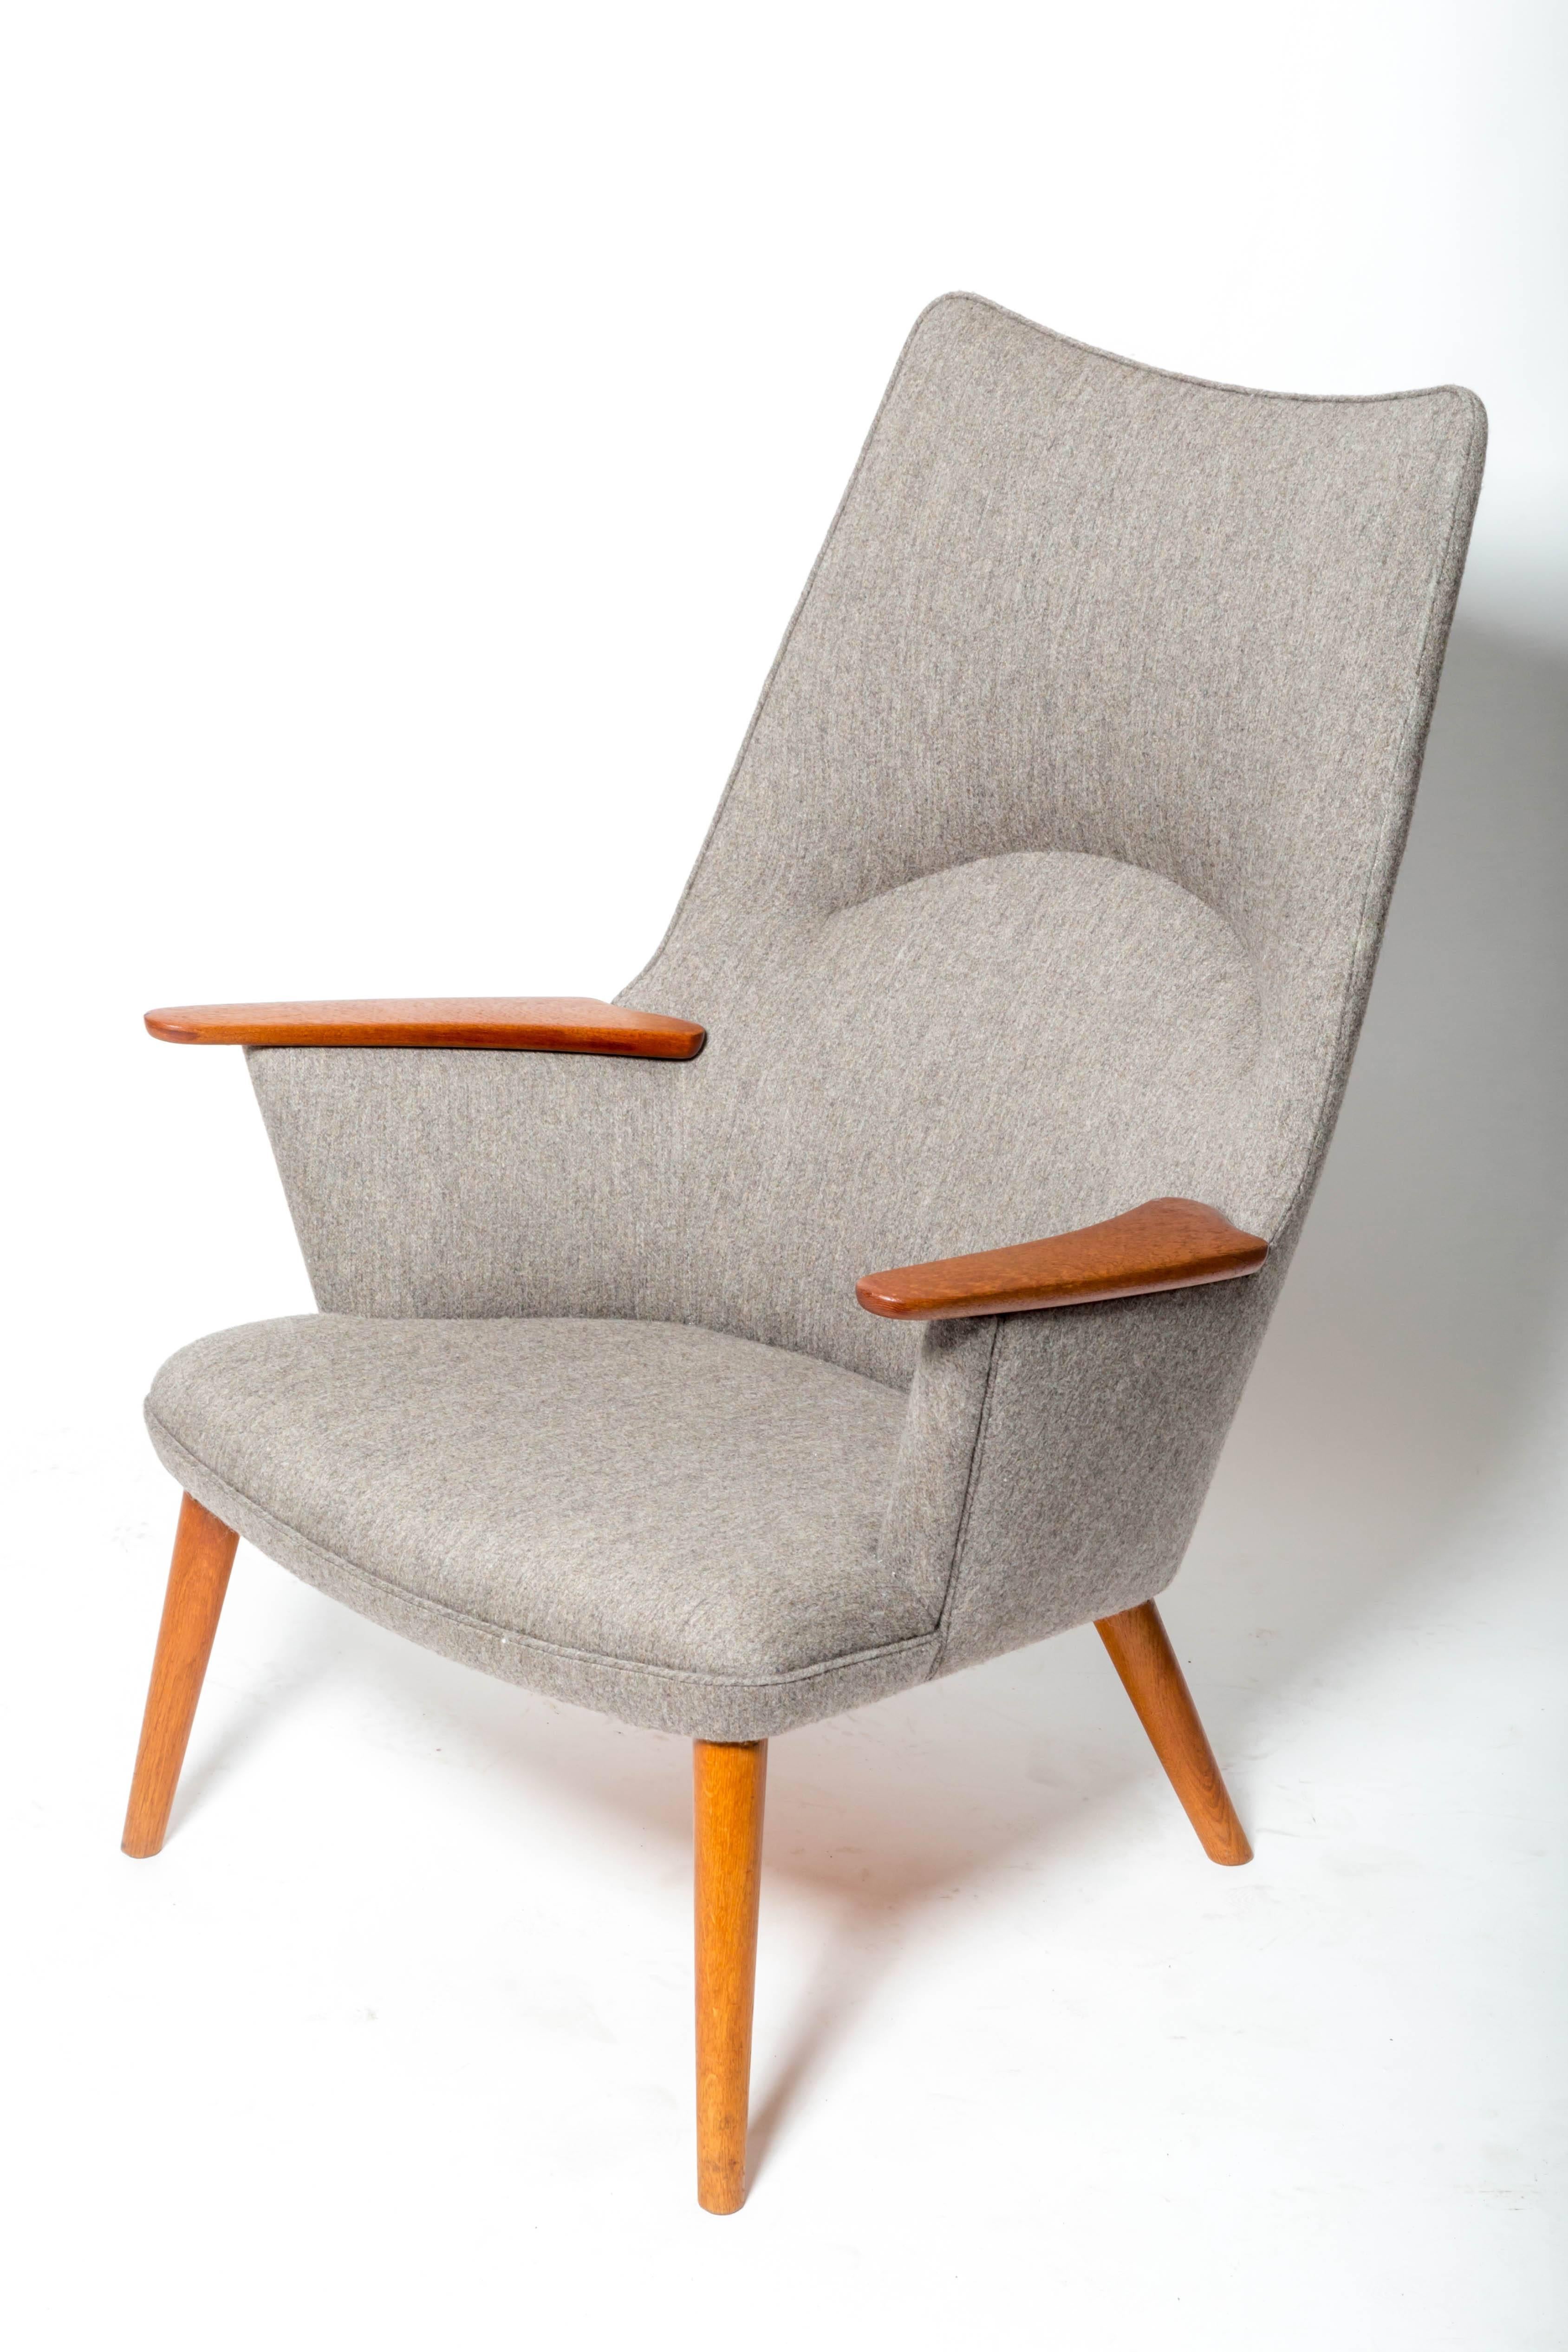 Hans J. Wegner AP-27 Lounge Chairs for A.P. Stolen, Denmark, 1954

They are in a heathered grey wool upholstery. 2 are available.


 